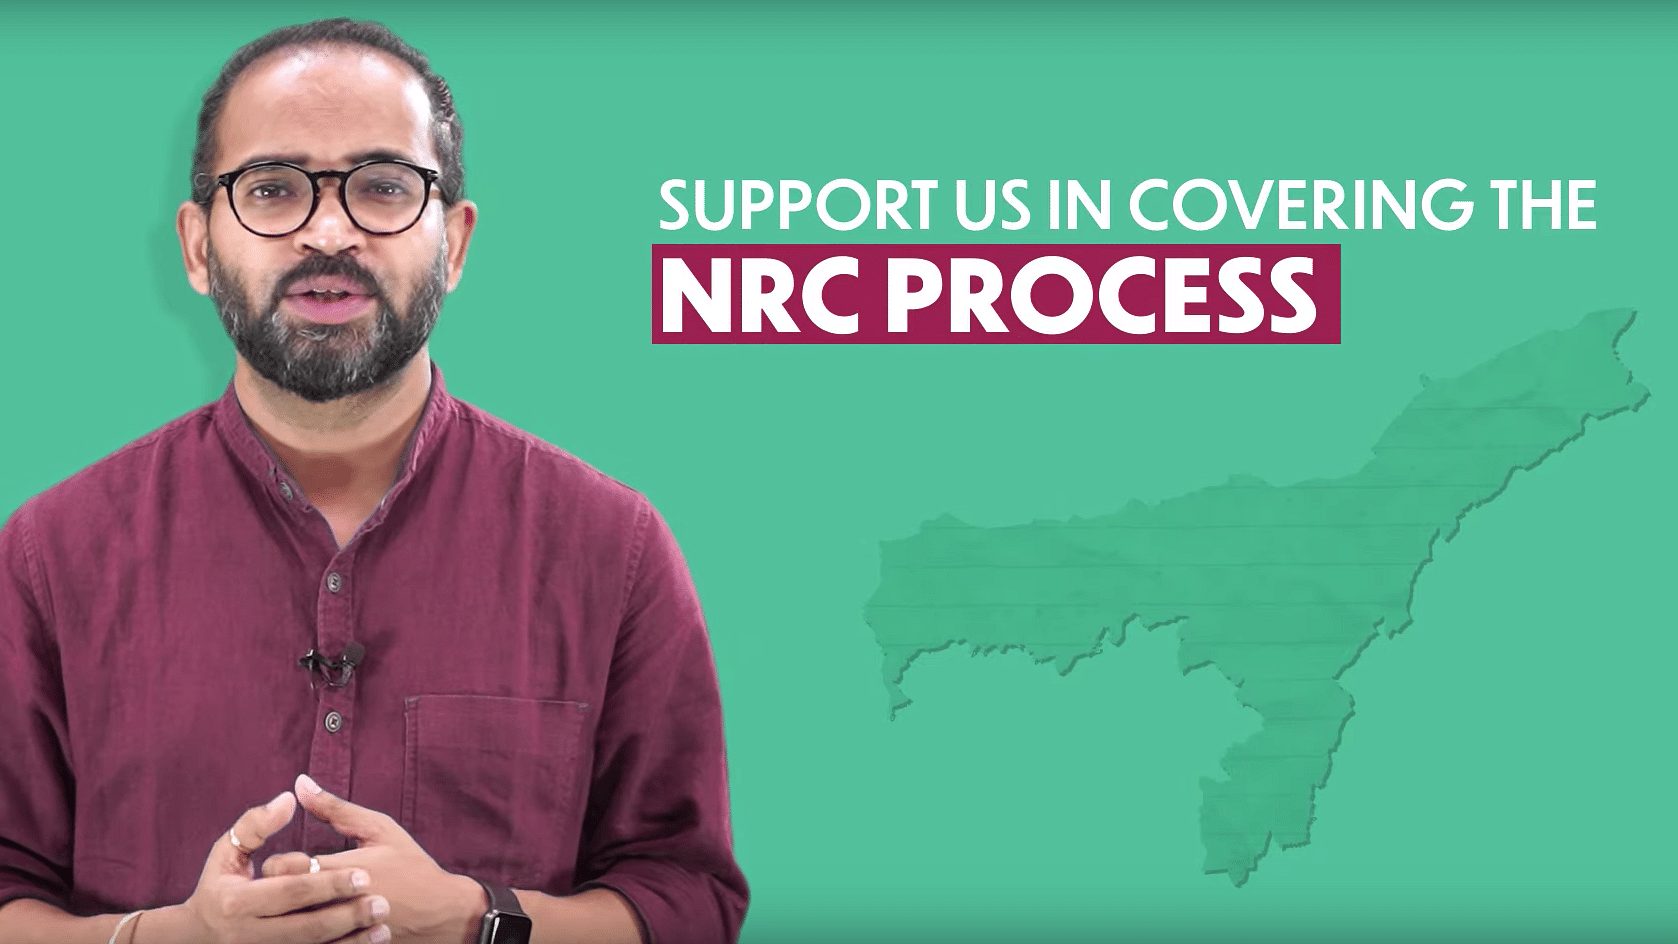 Through explainers, short documentaries, and ground reports, we at The Quint aim to bring you in-depth coverage of <a href="https://www.thequint.com/big-story/assam-citizen-registry">Assam’s NRC Story</a>.